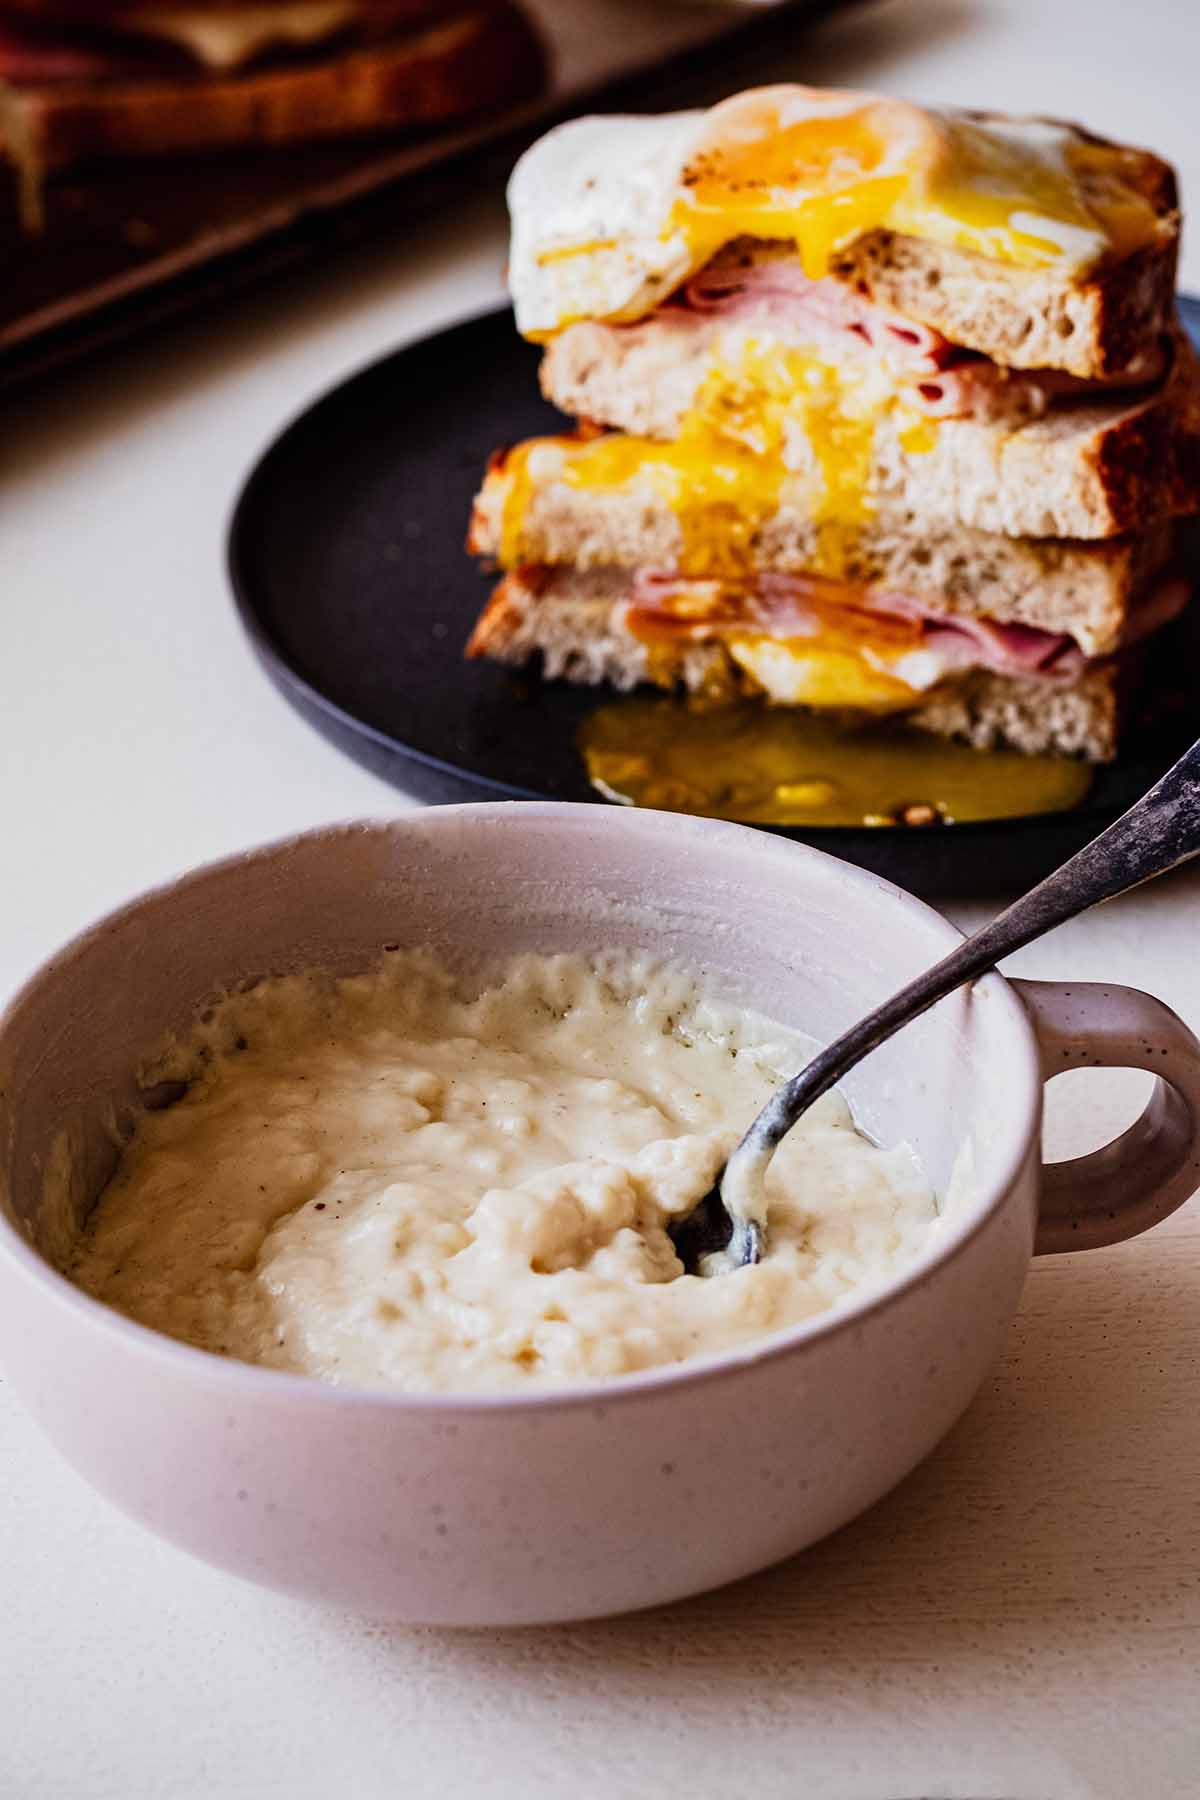 Bowl of croque madame sauce with a spoon. A croque madame sandwich is in the background.